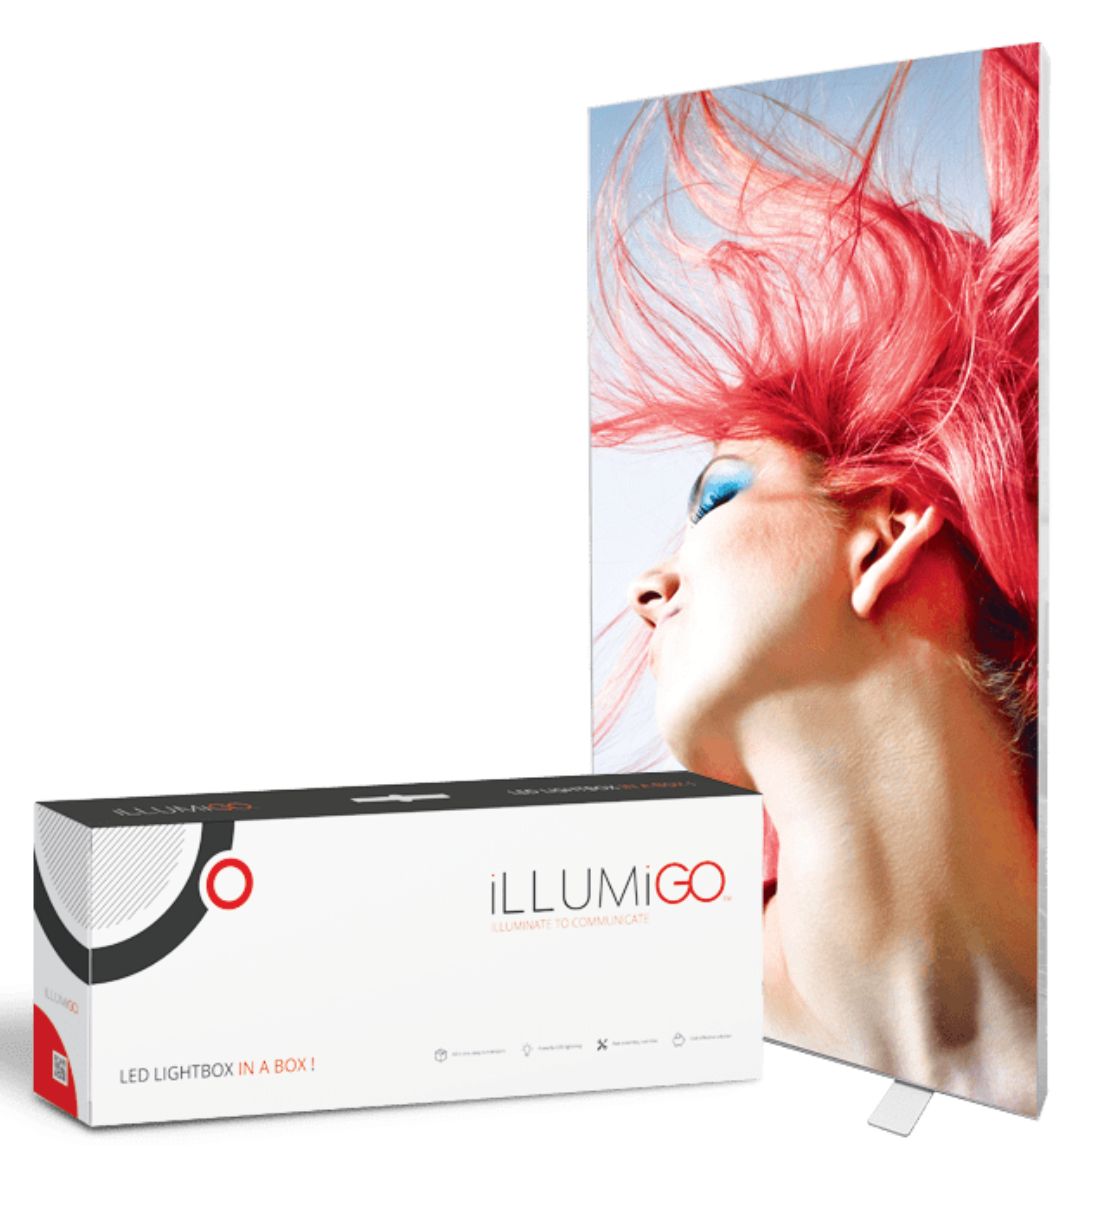 Read more about the article New Product! iLLUMiGO